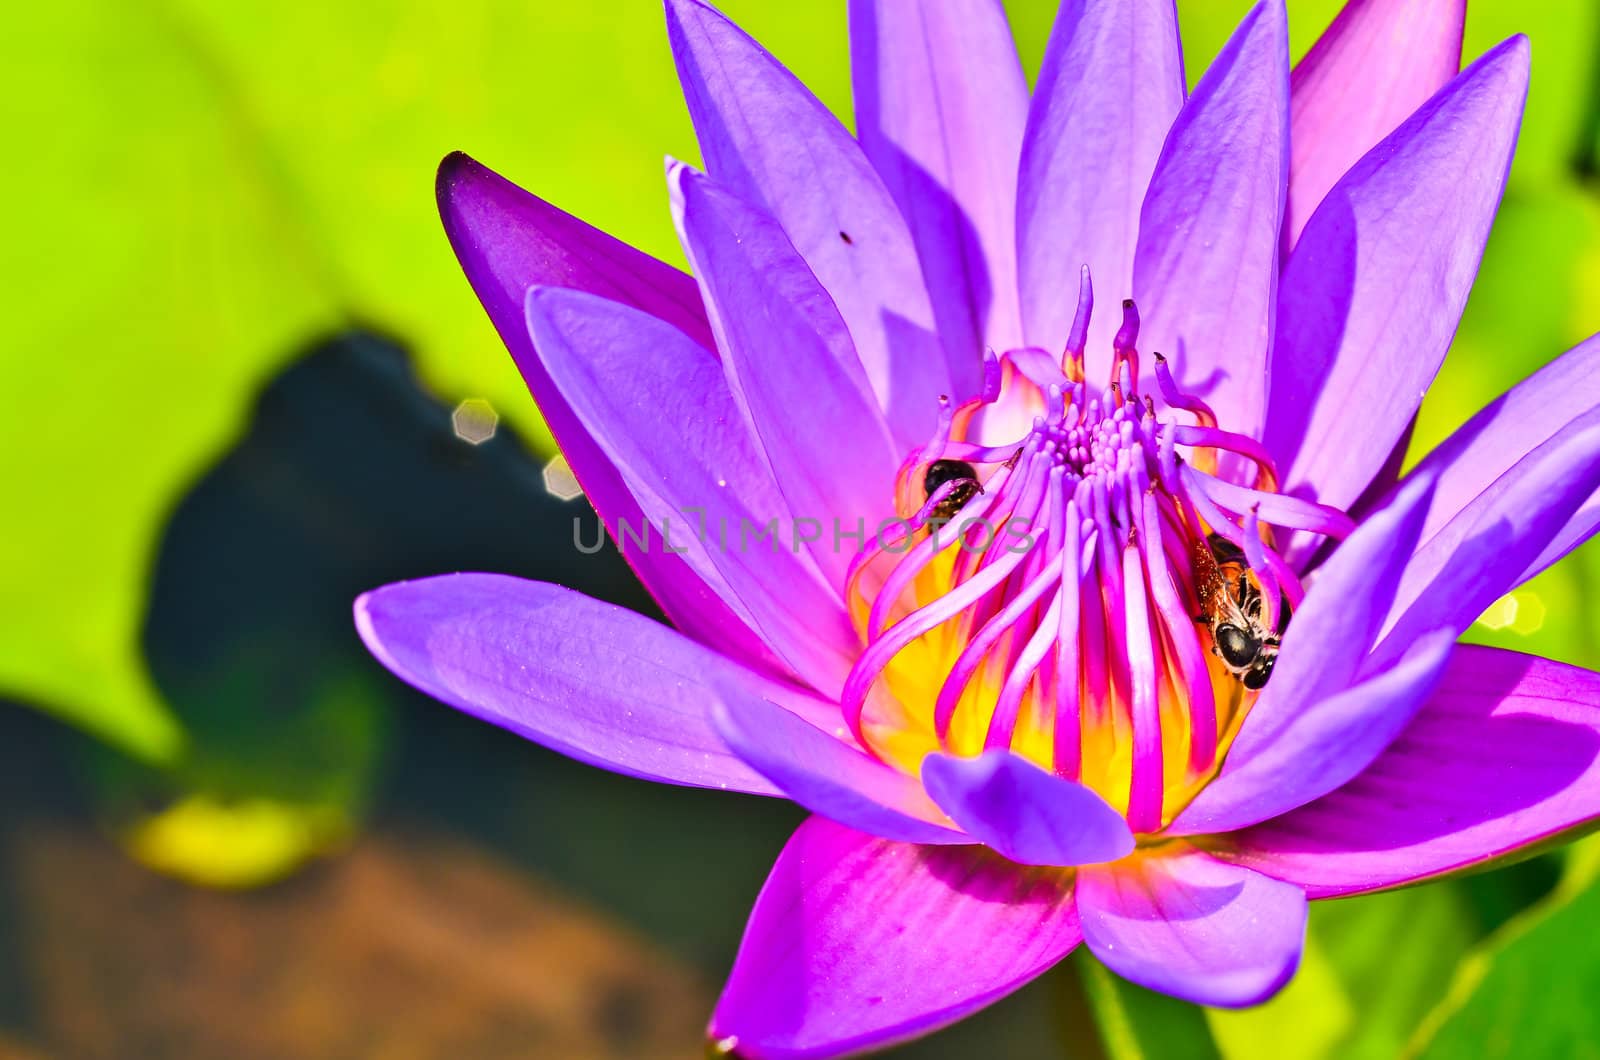 Bee on the water lily flower by raweenuttapong